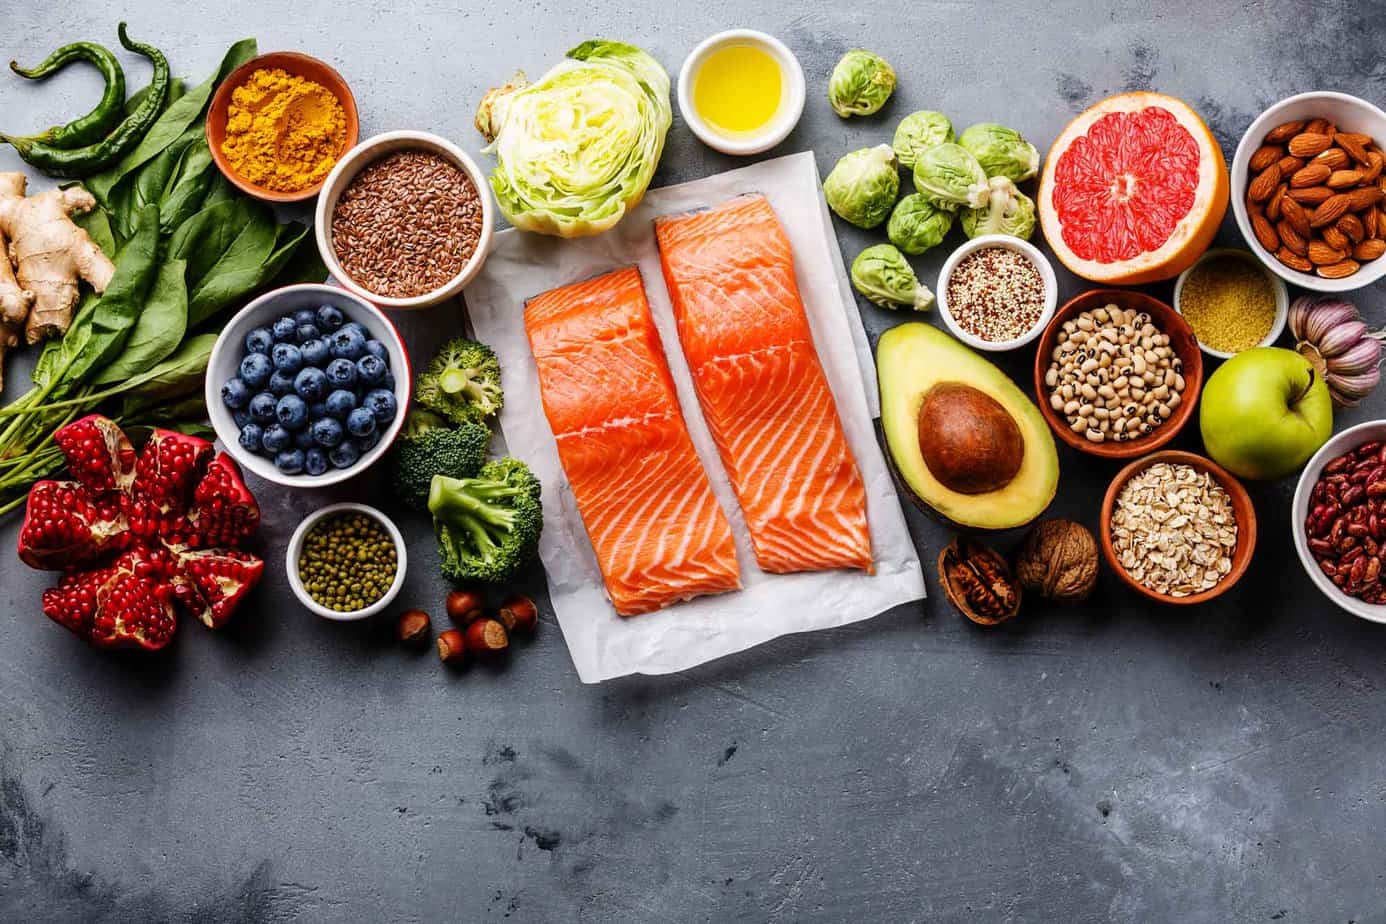 salmon, avocado and various foods displayed on the coutner